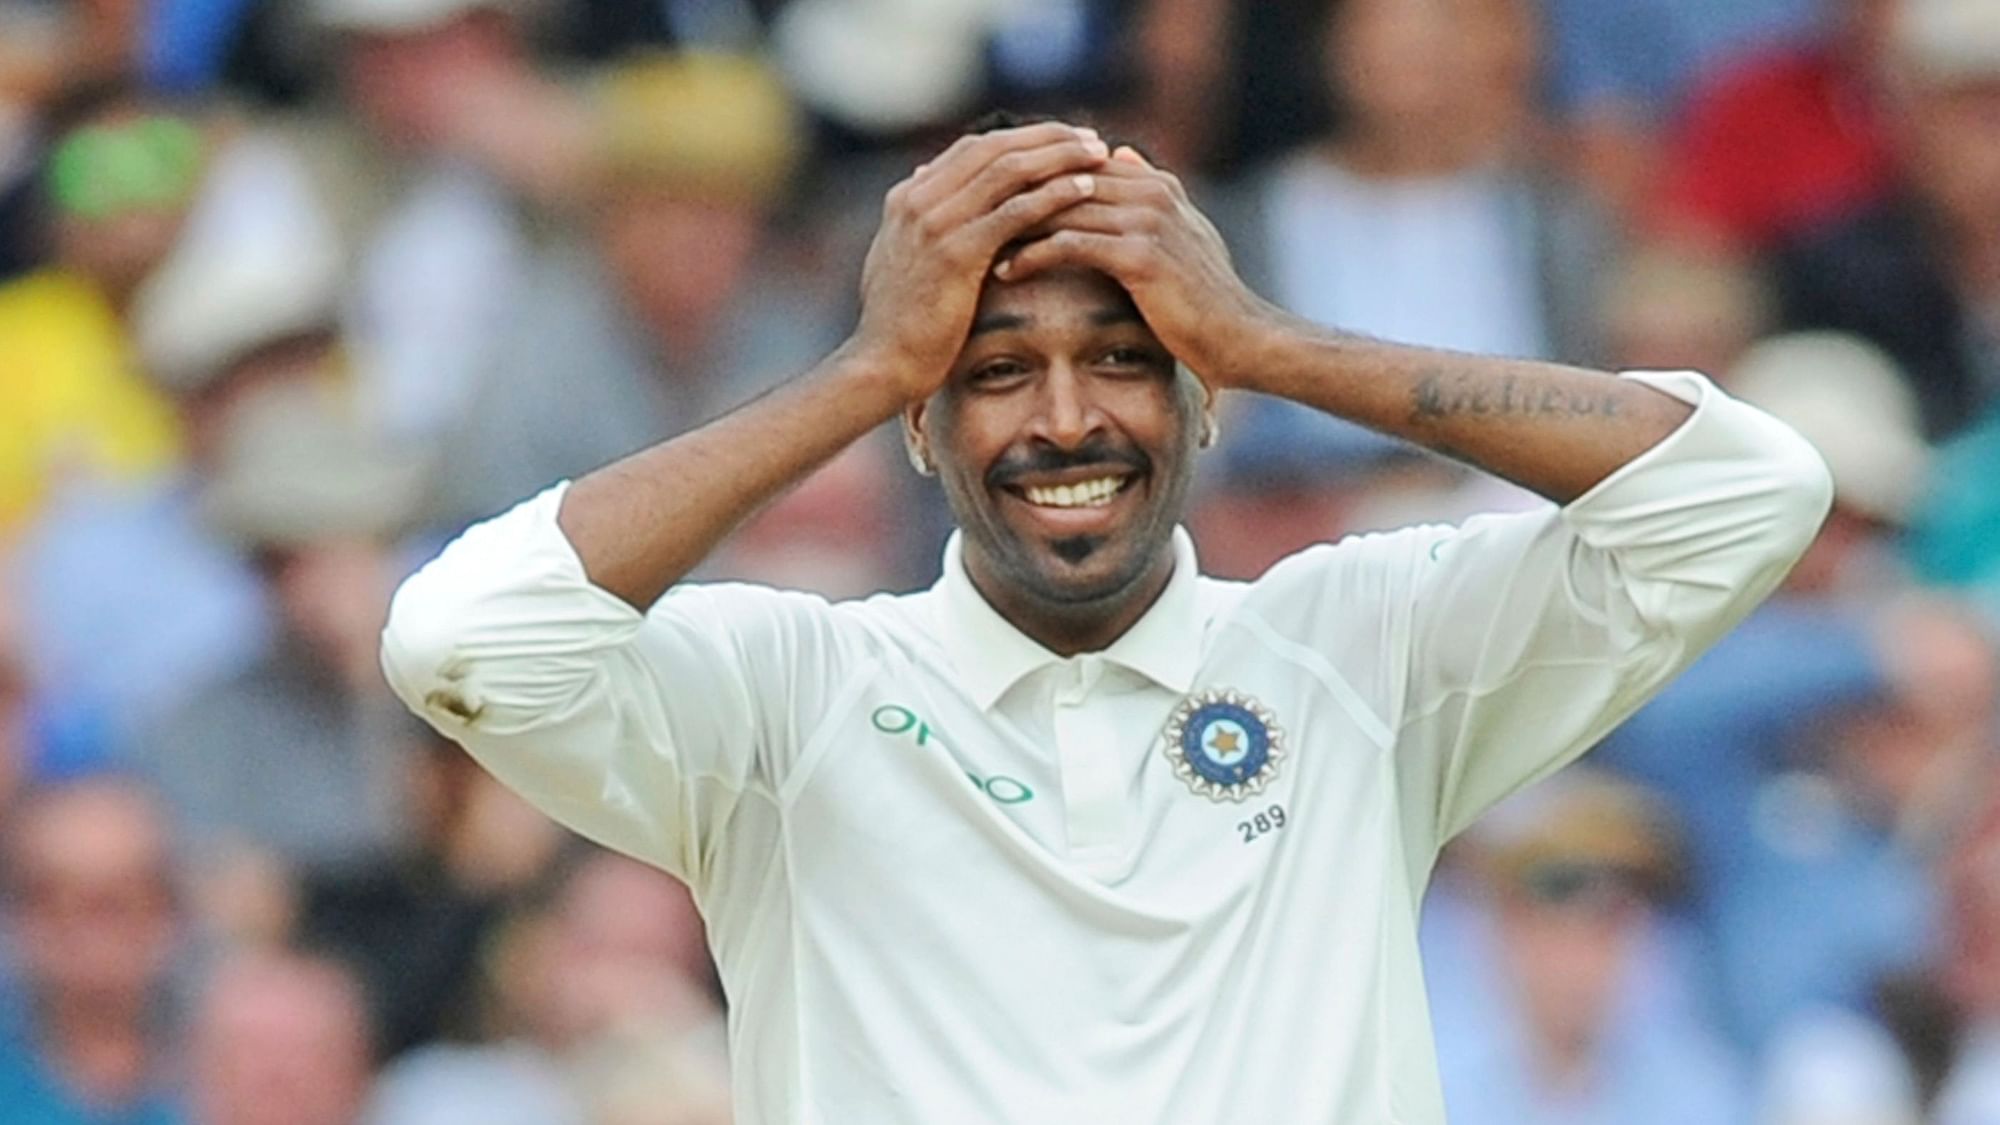 All-rounder Hardik Pandya will miss India’s limited overs series against Australia with a lower-back stiffness.